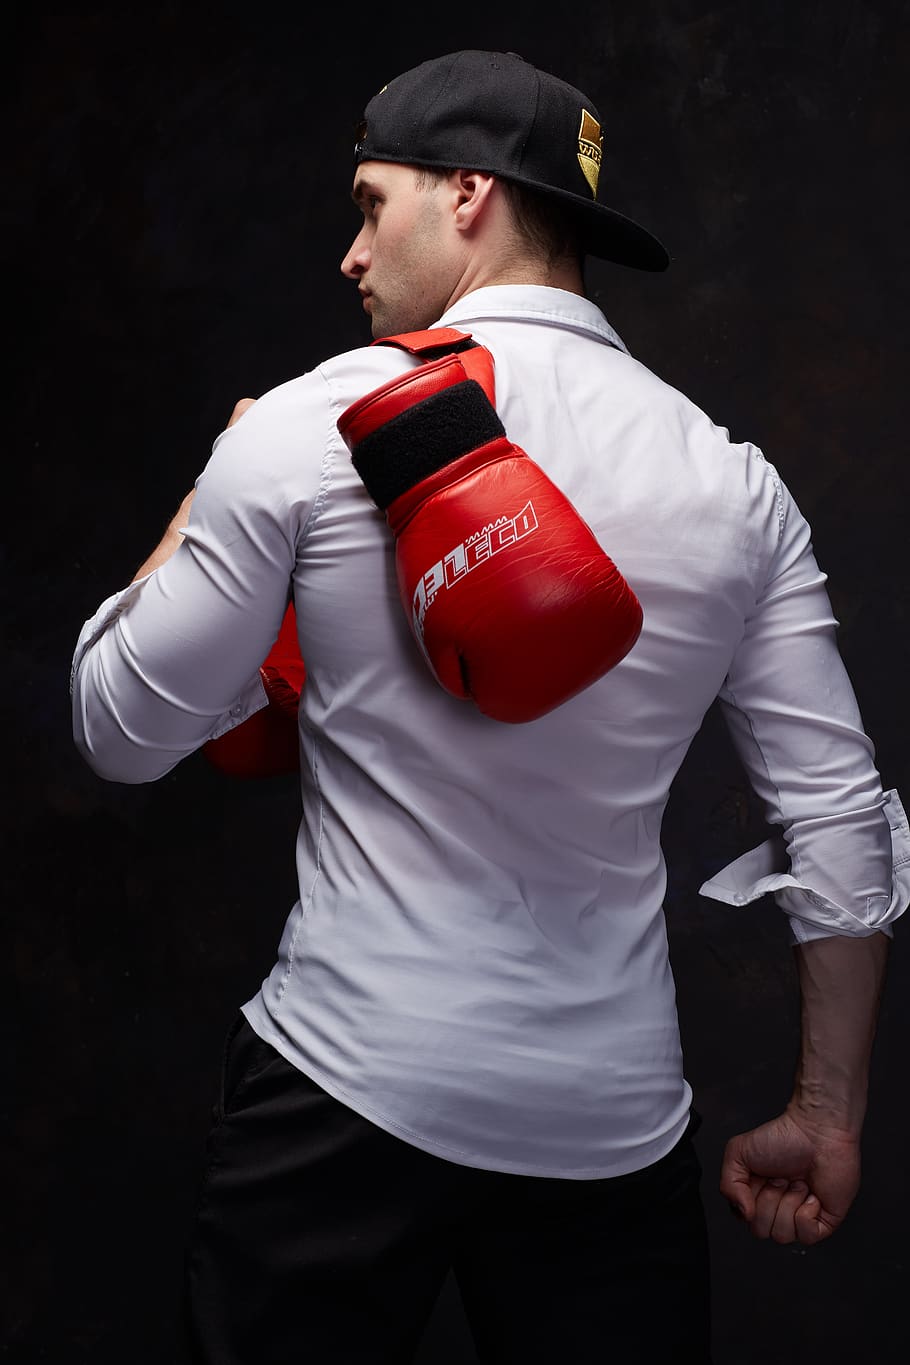 boxing, model, men, sport, sports, style, gloves, body, three quarter length, one person